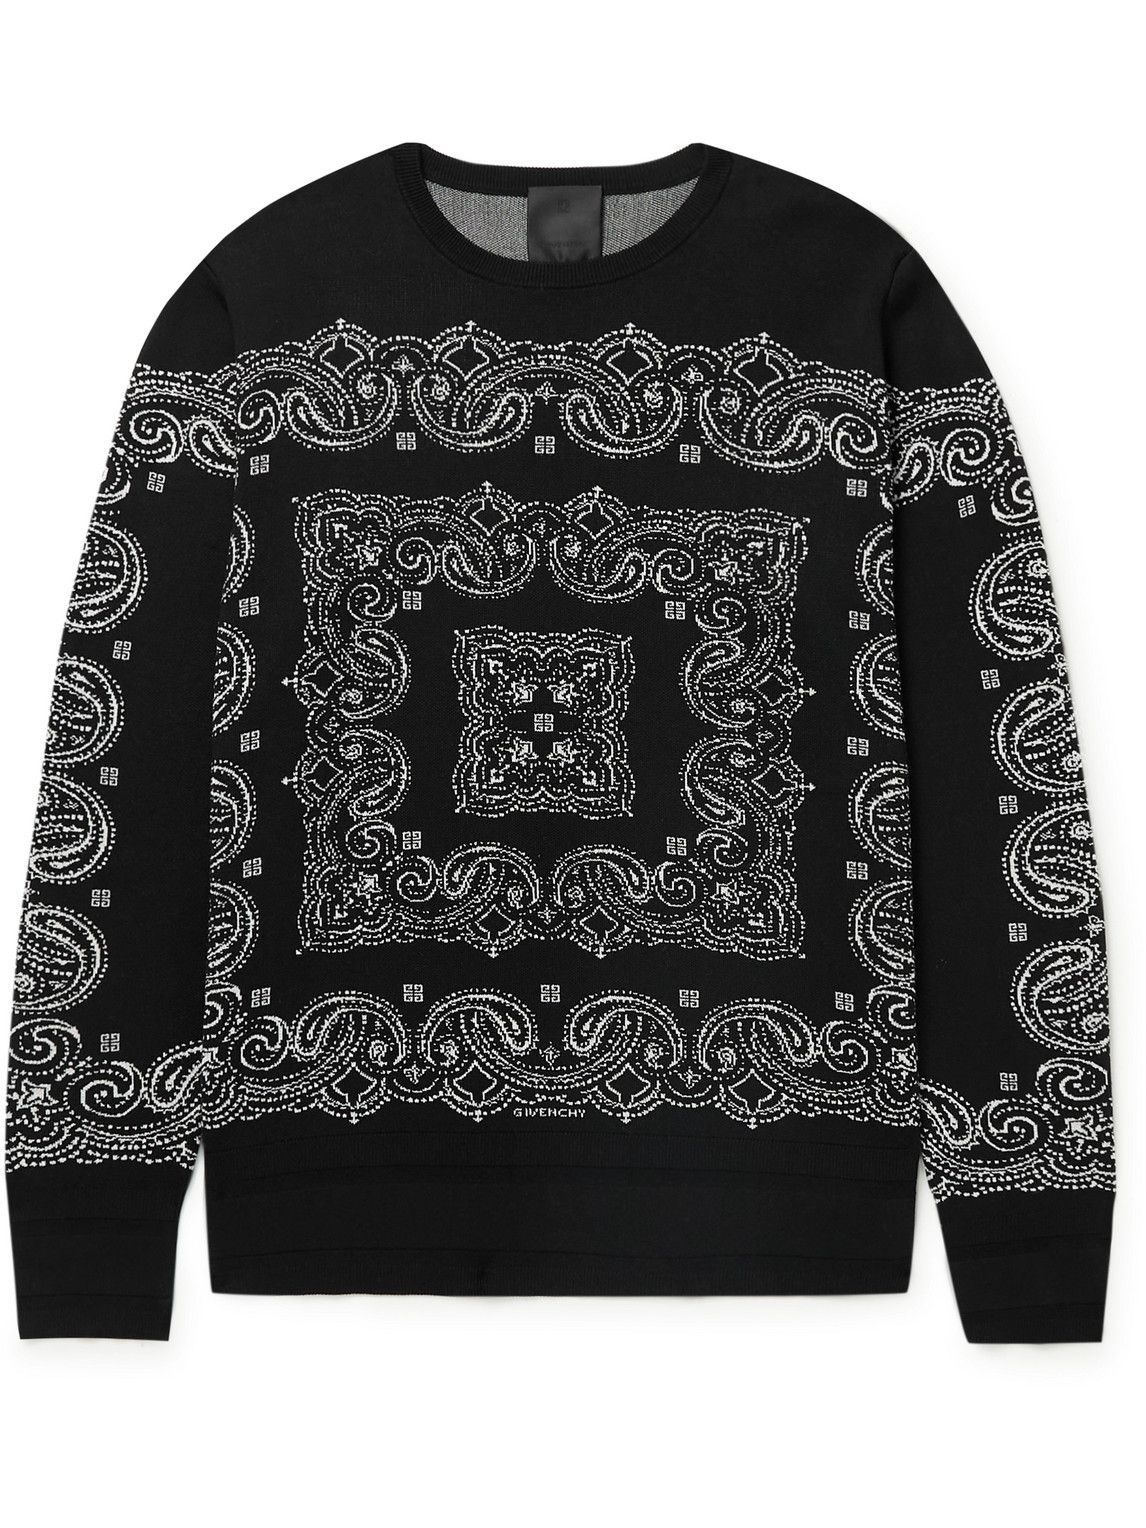 Givenchy Sweater Black